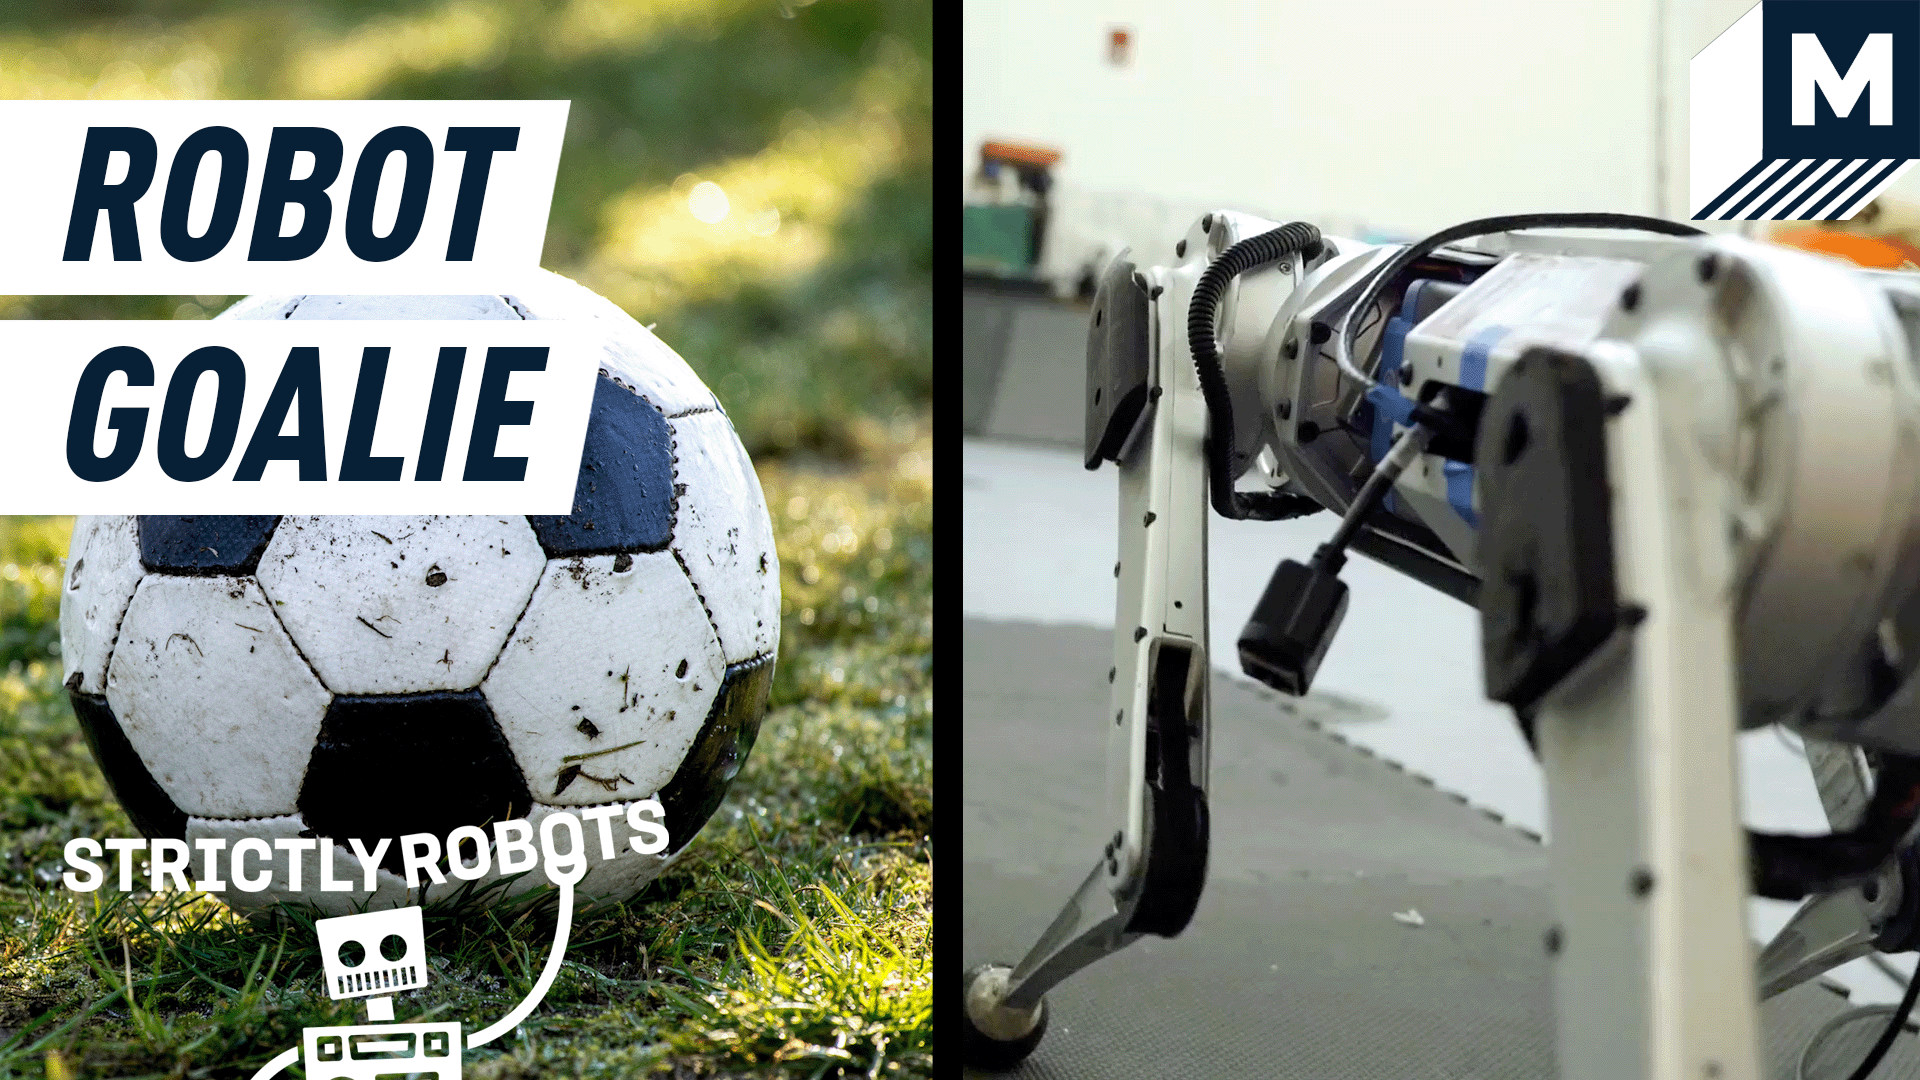 A Mini Cheetah robot is now learning to play soccer